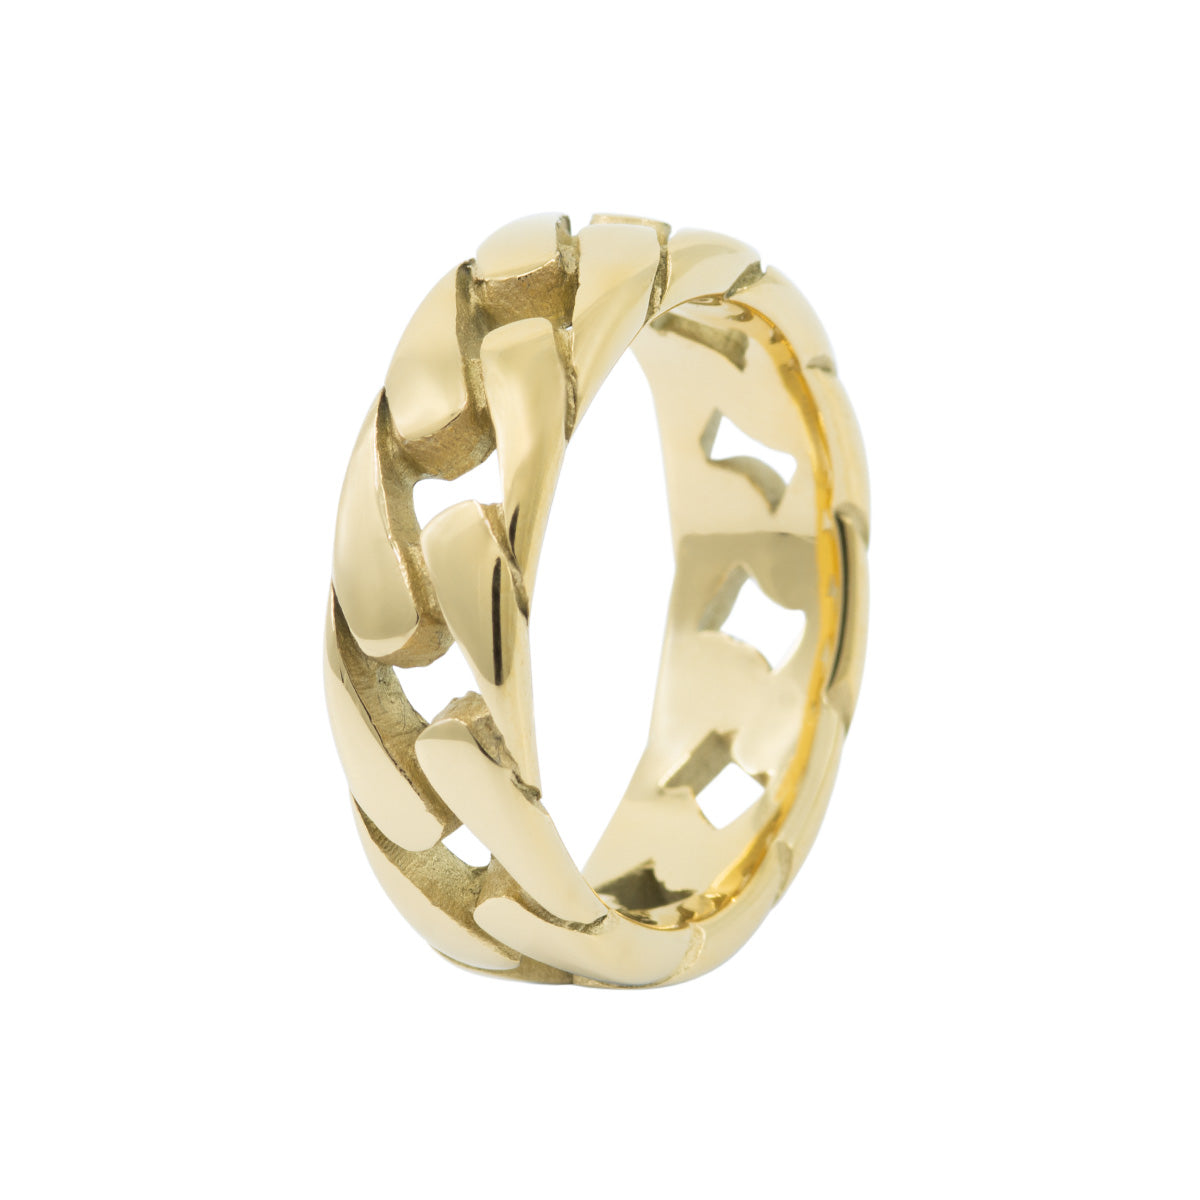 Men's Gold Chain Link Ring